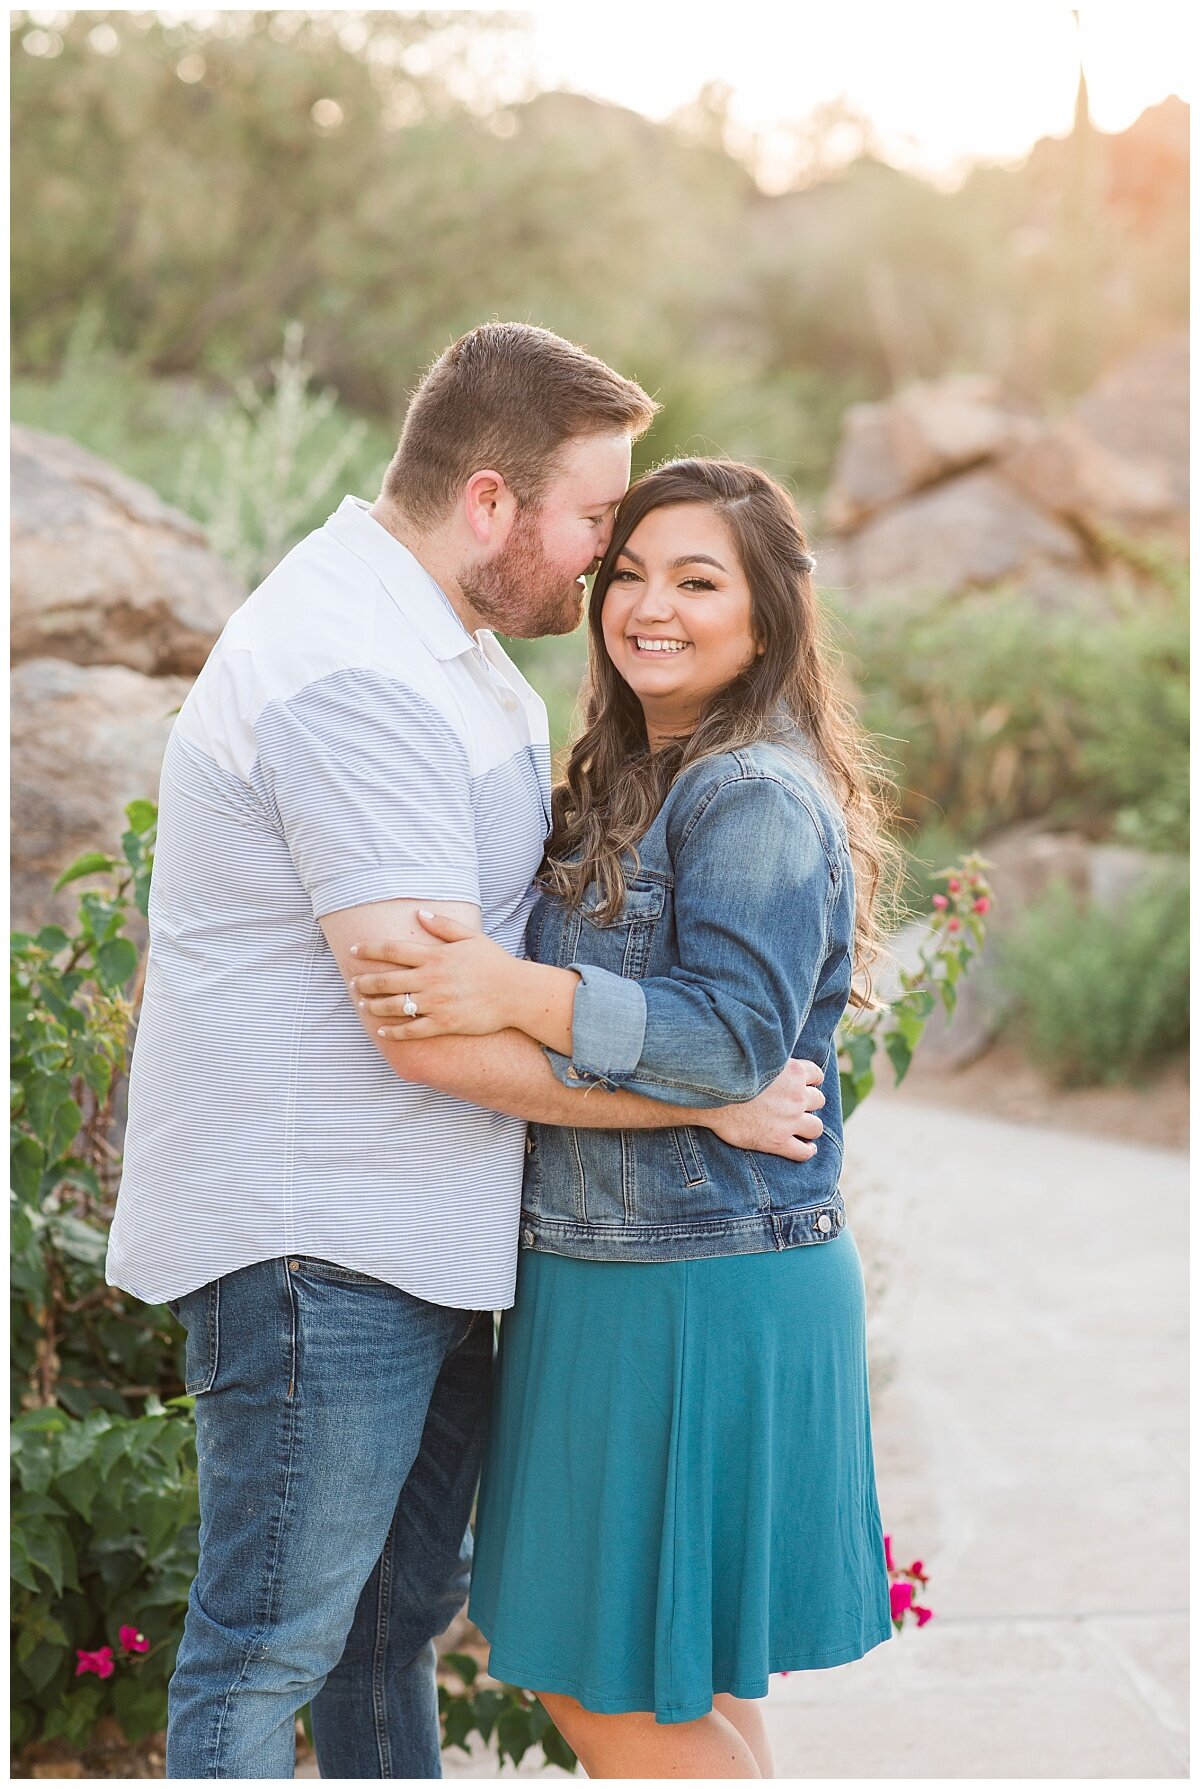 Engagement Photos at Stone Canyon Private Golf Community in Tucson, Arizona.